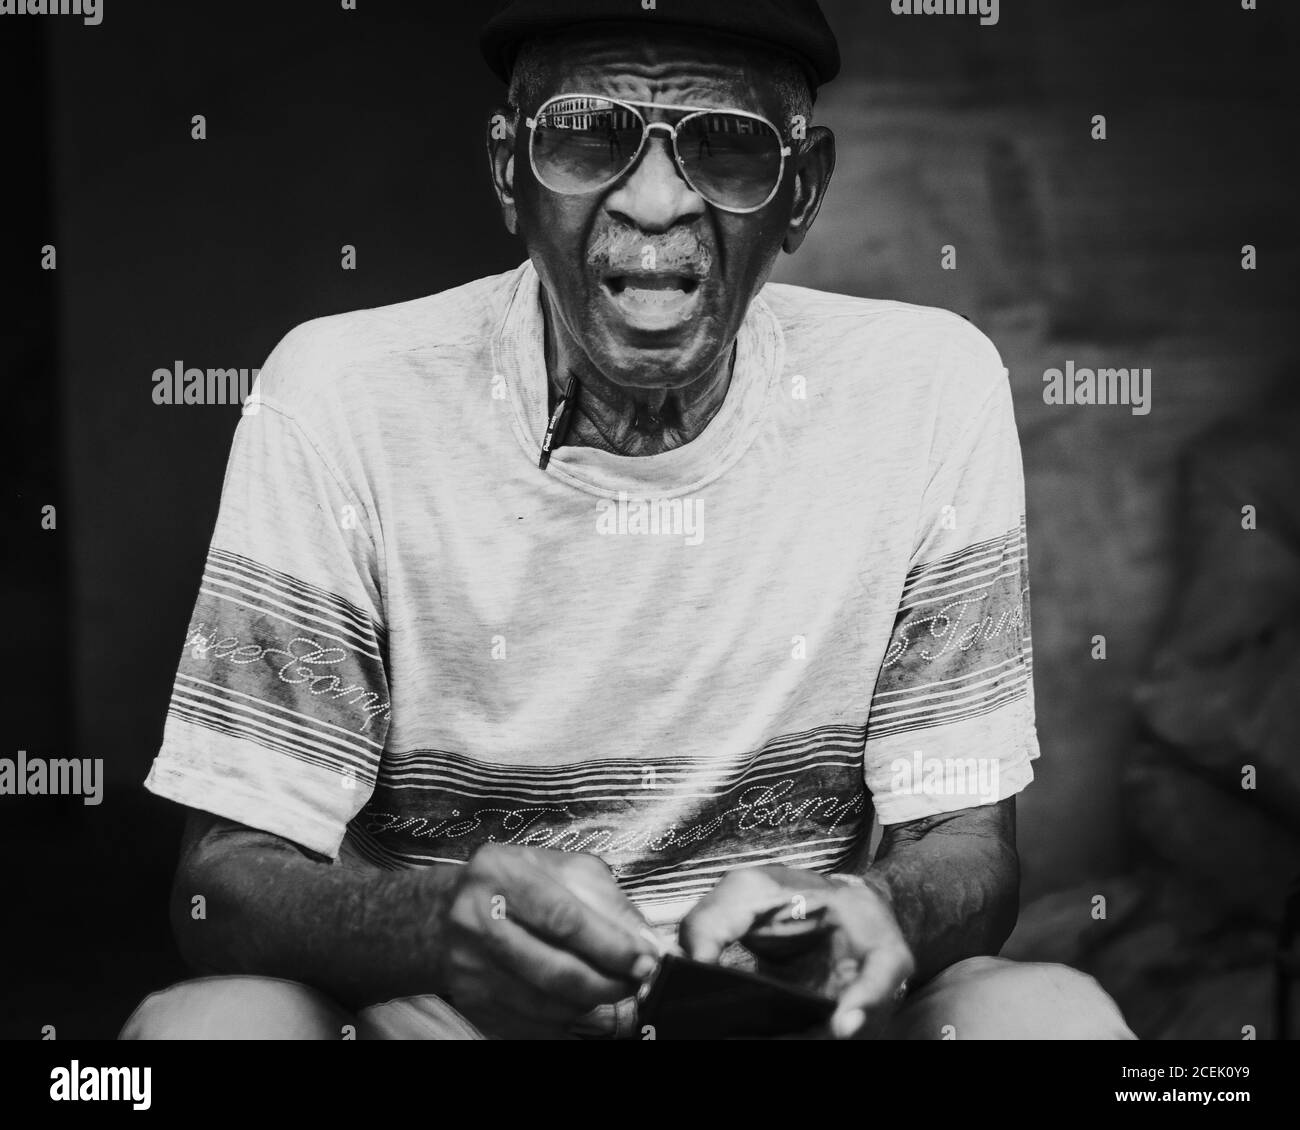 LA HABANA, CUBA - MAY 1, 2018: Elderly ethnic man in sunglasses and t-shirt with cap looking at camera sitting on street of Cuba. Stock Photo